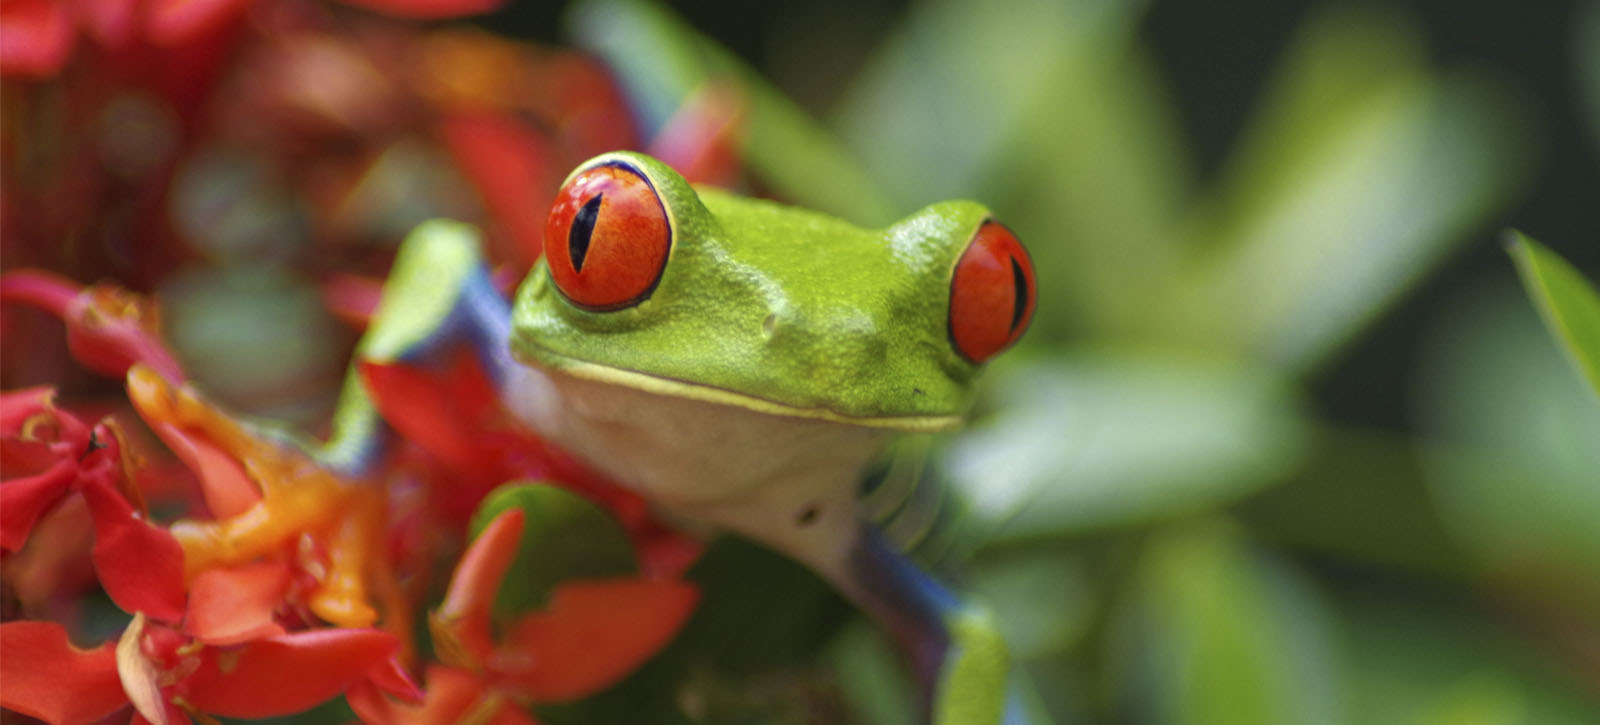 A green frog on a tree branch